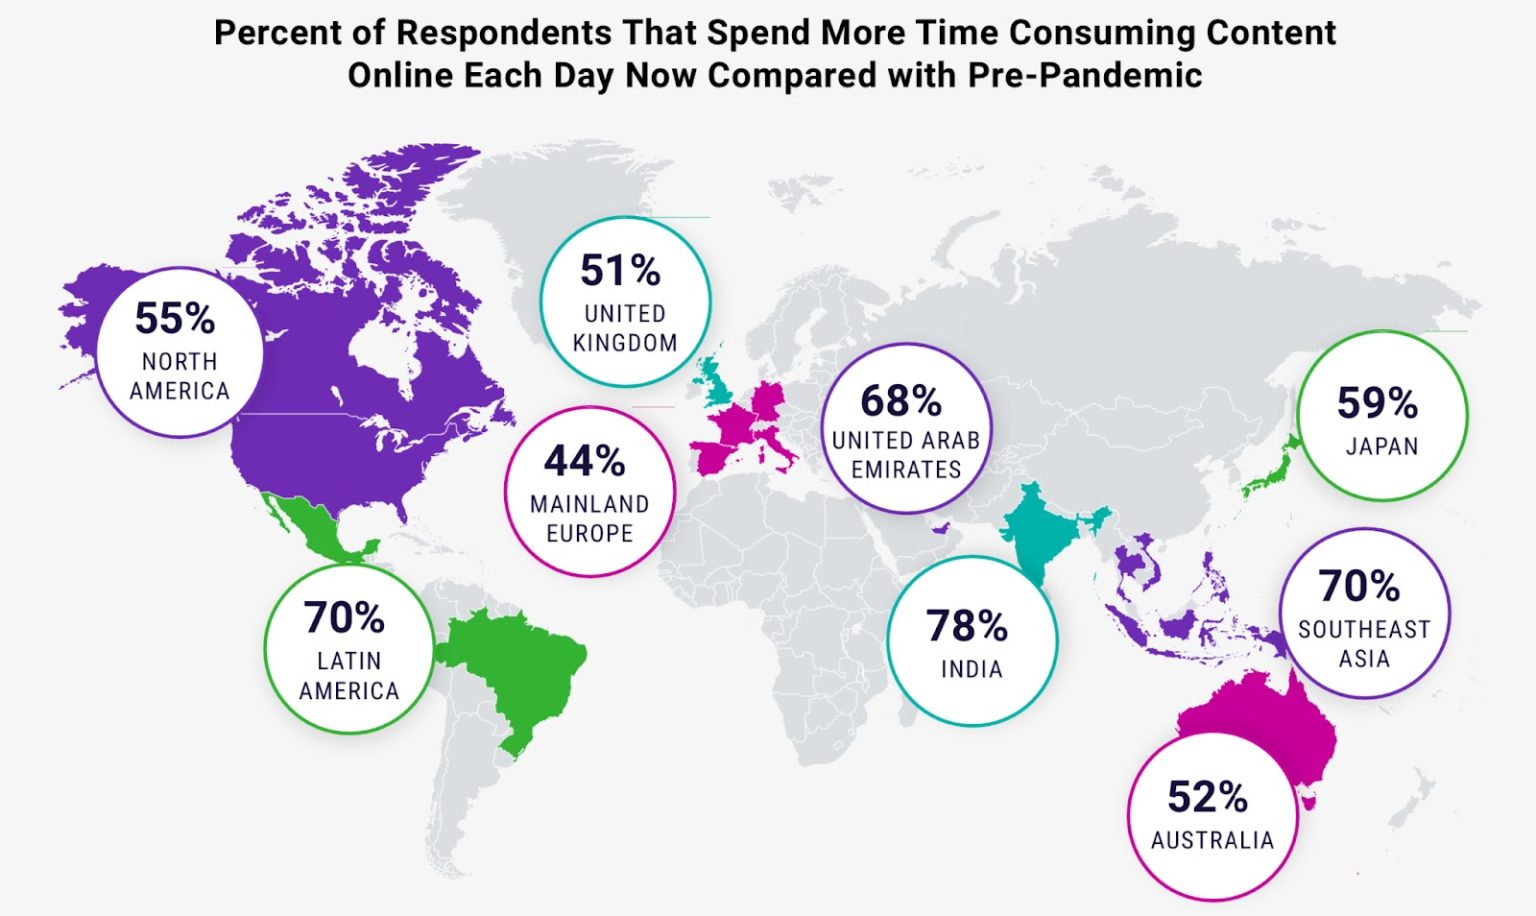 Percent of Respondents That Spend More Time Consuming Content Online Each Day Now Compared with Pre-Pandemic